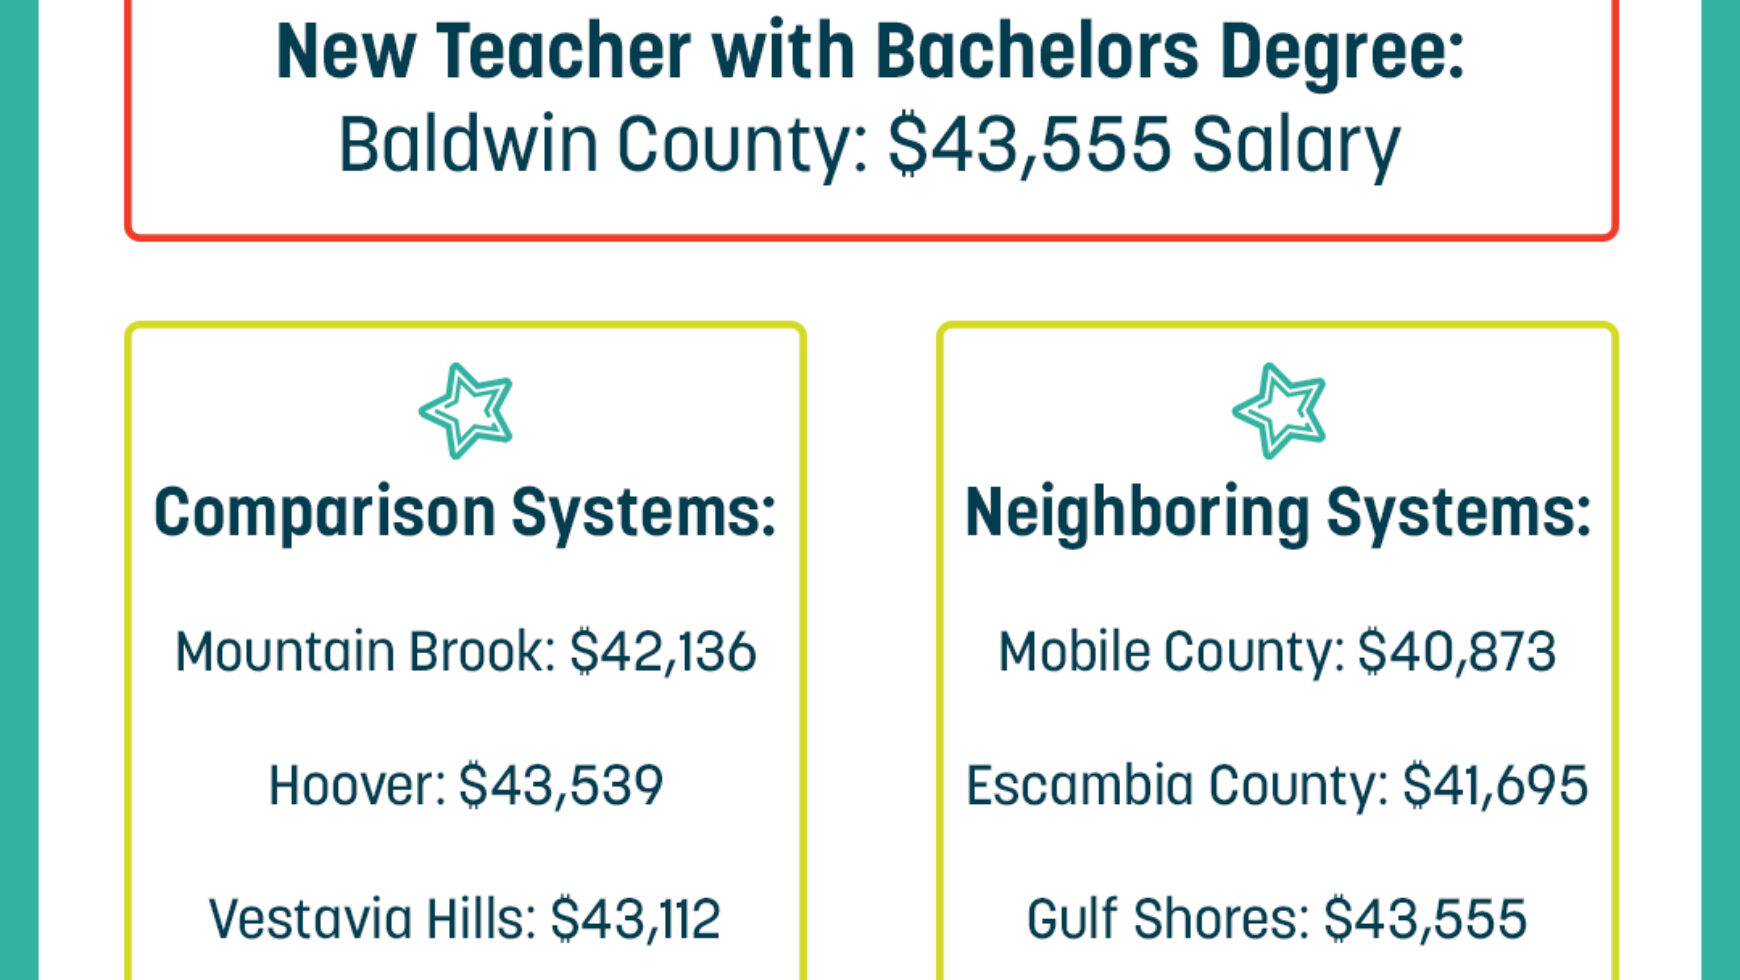 Baldwin County: Attracting and Retaining Great Teachers